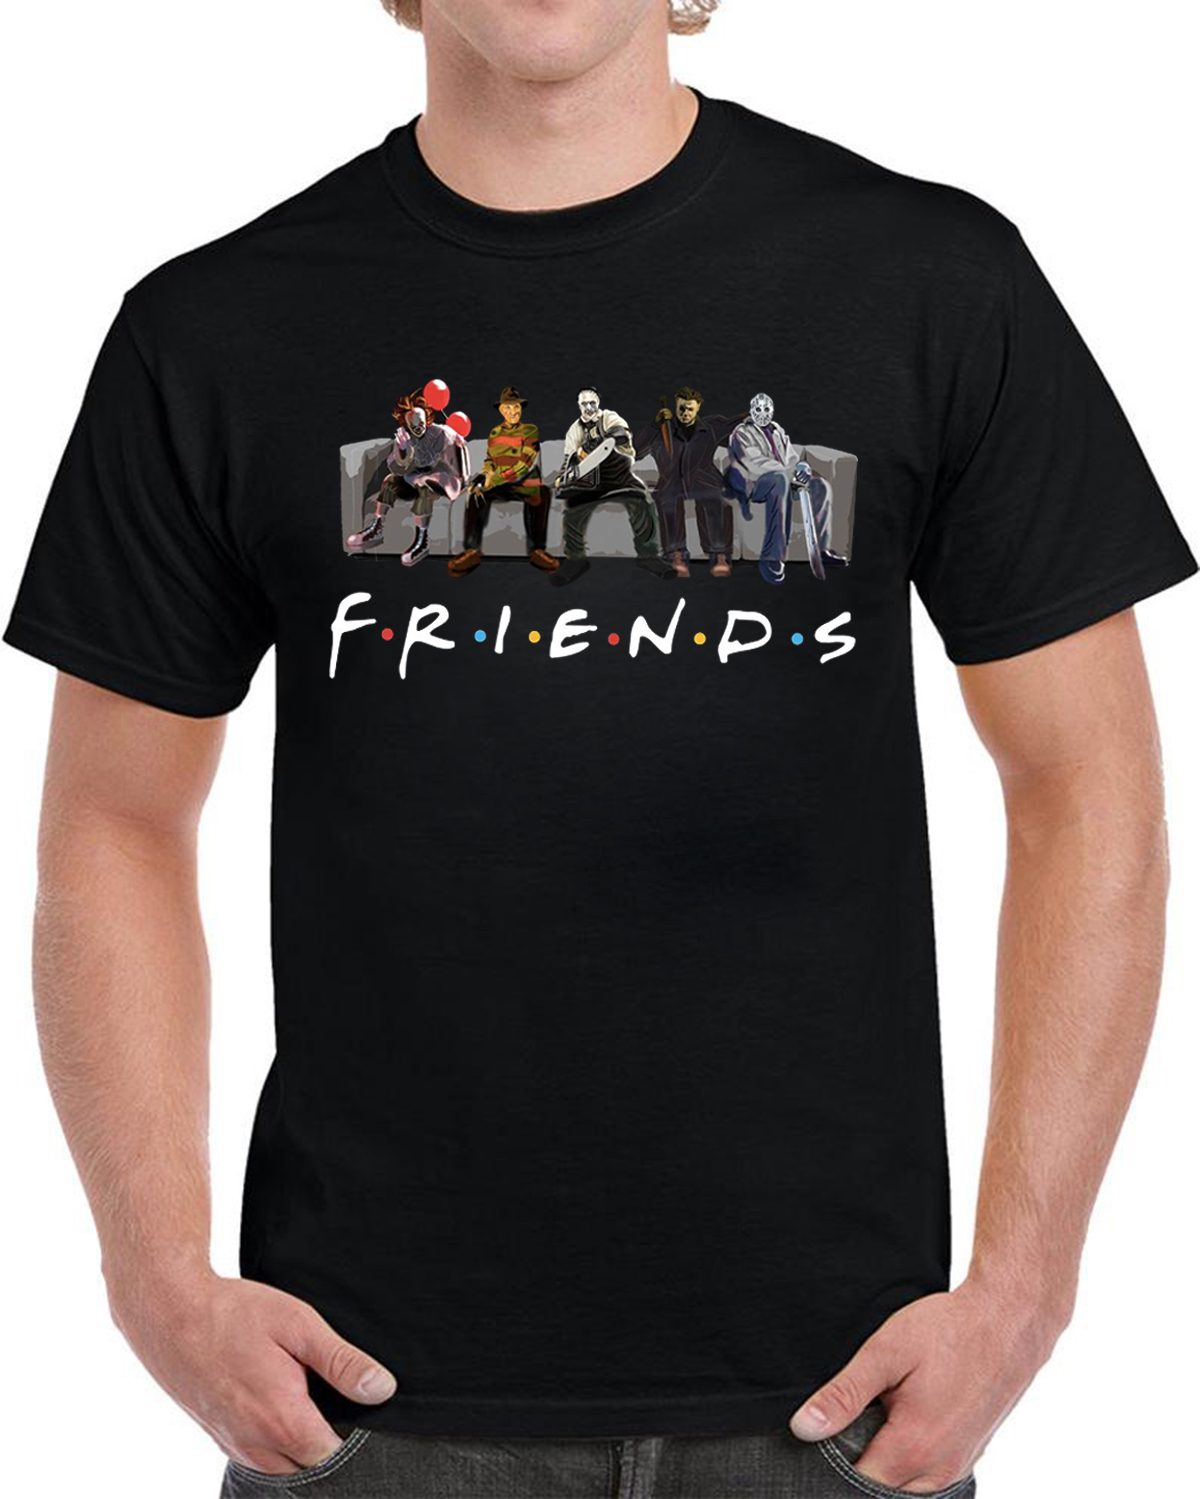 Funny Horror Movie Characters Friends TV Show T-Shirt - Reviewshirts Office
 Friends Shirt Tv Show